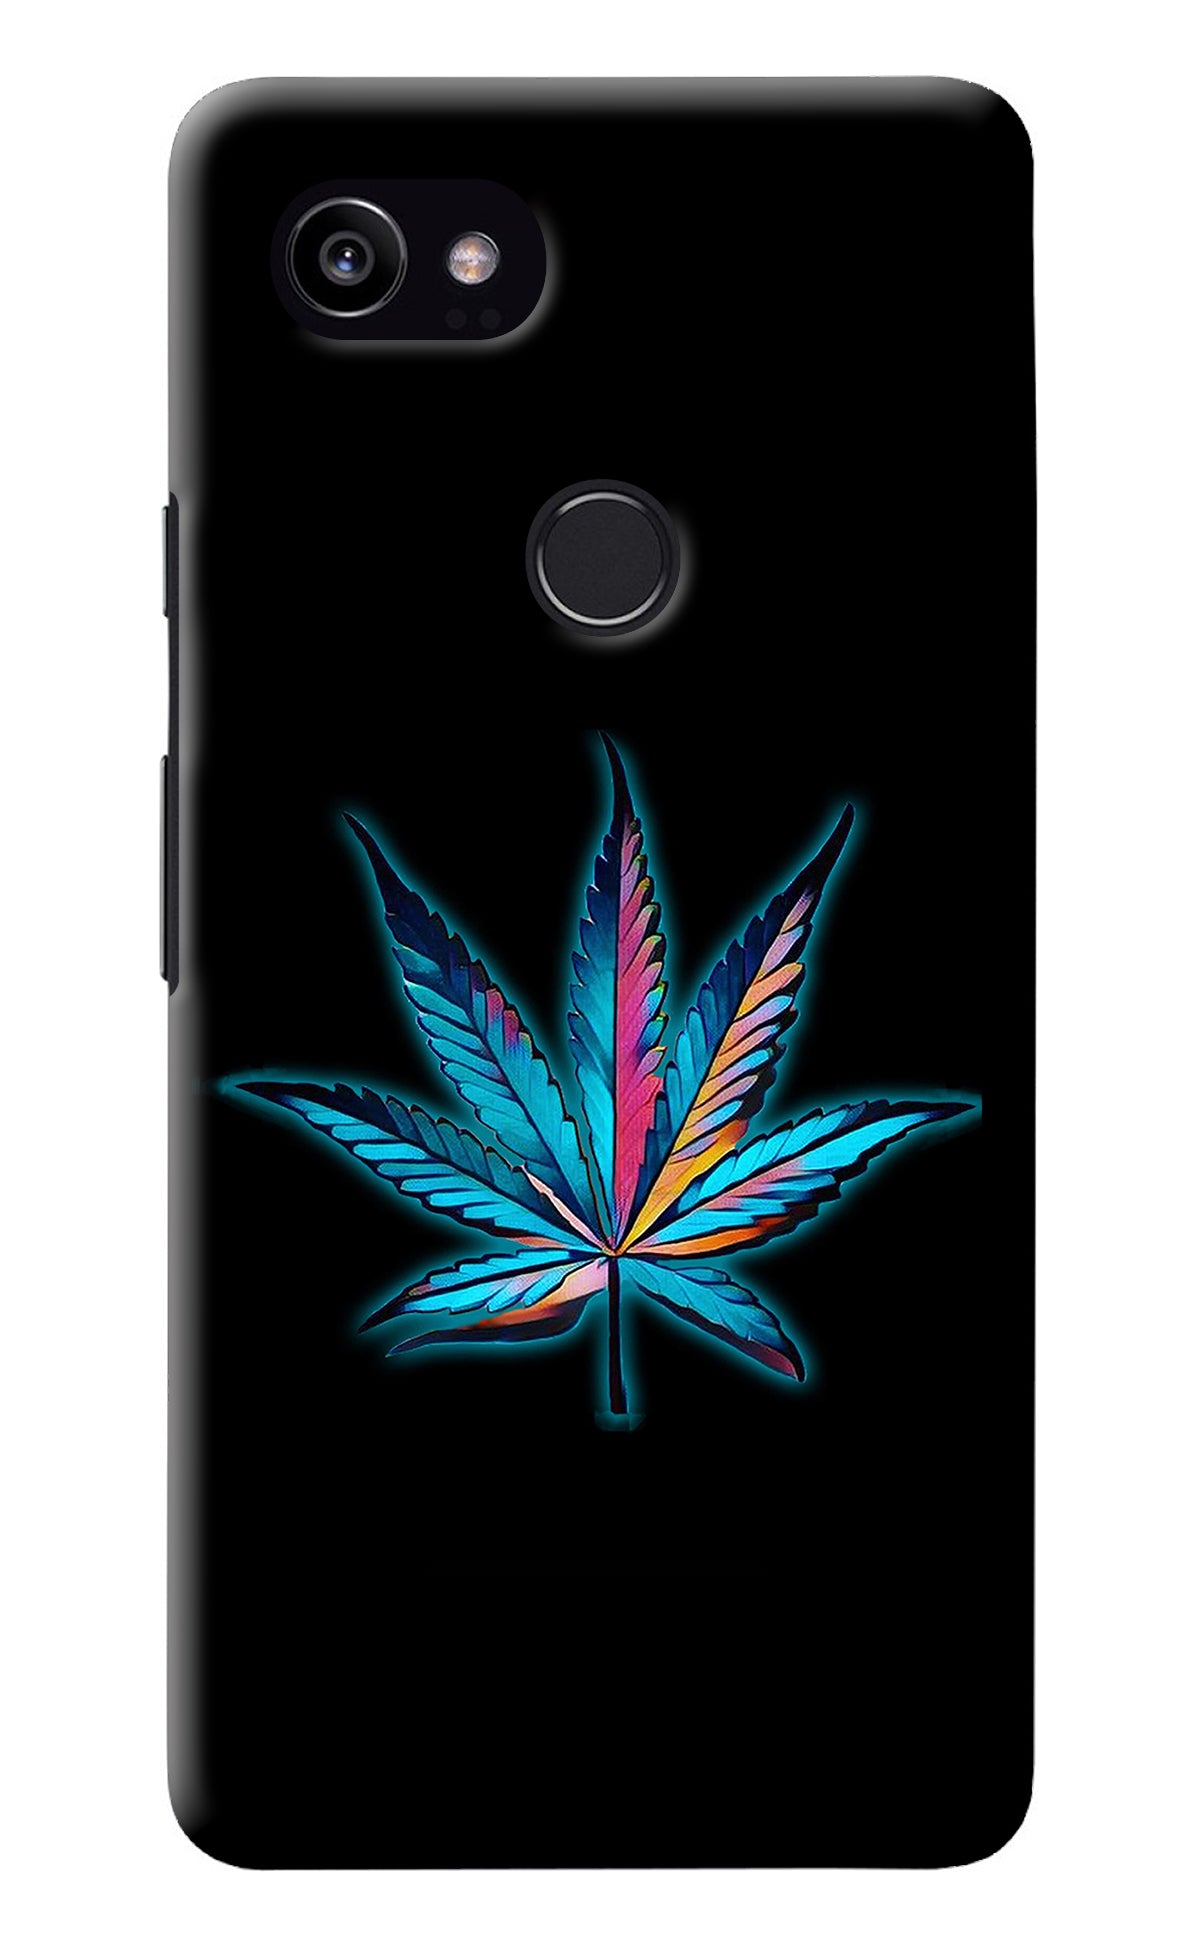 Weed Google Pixel 2 XL Back Cover